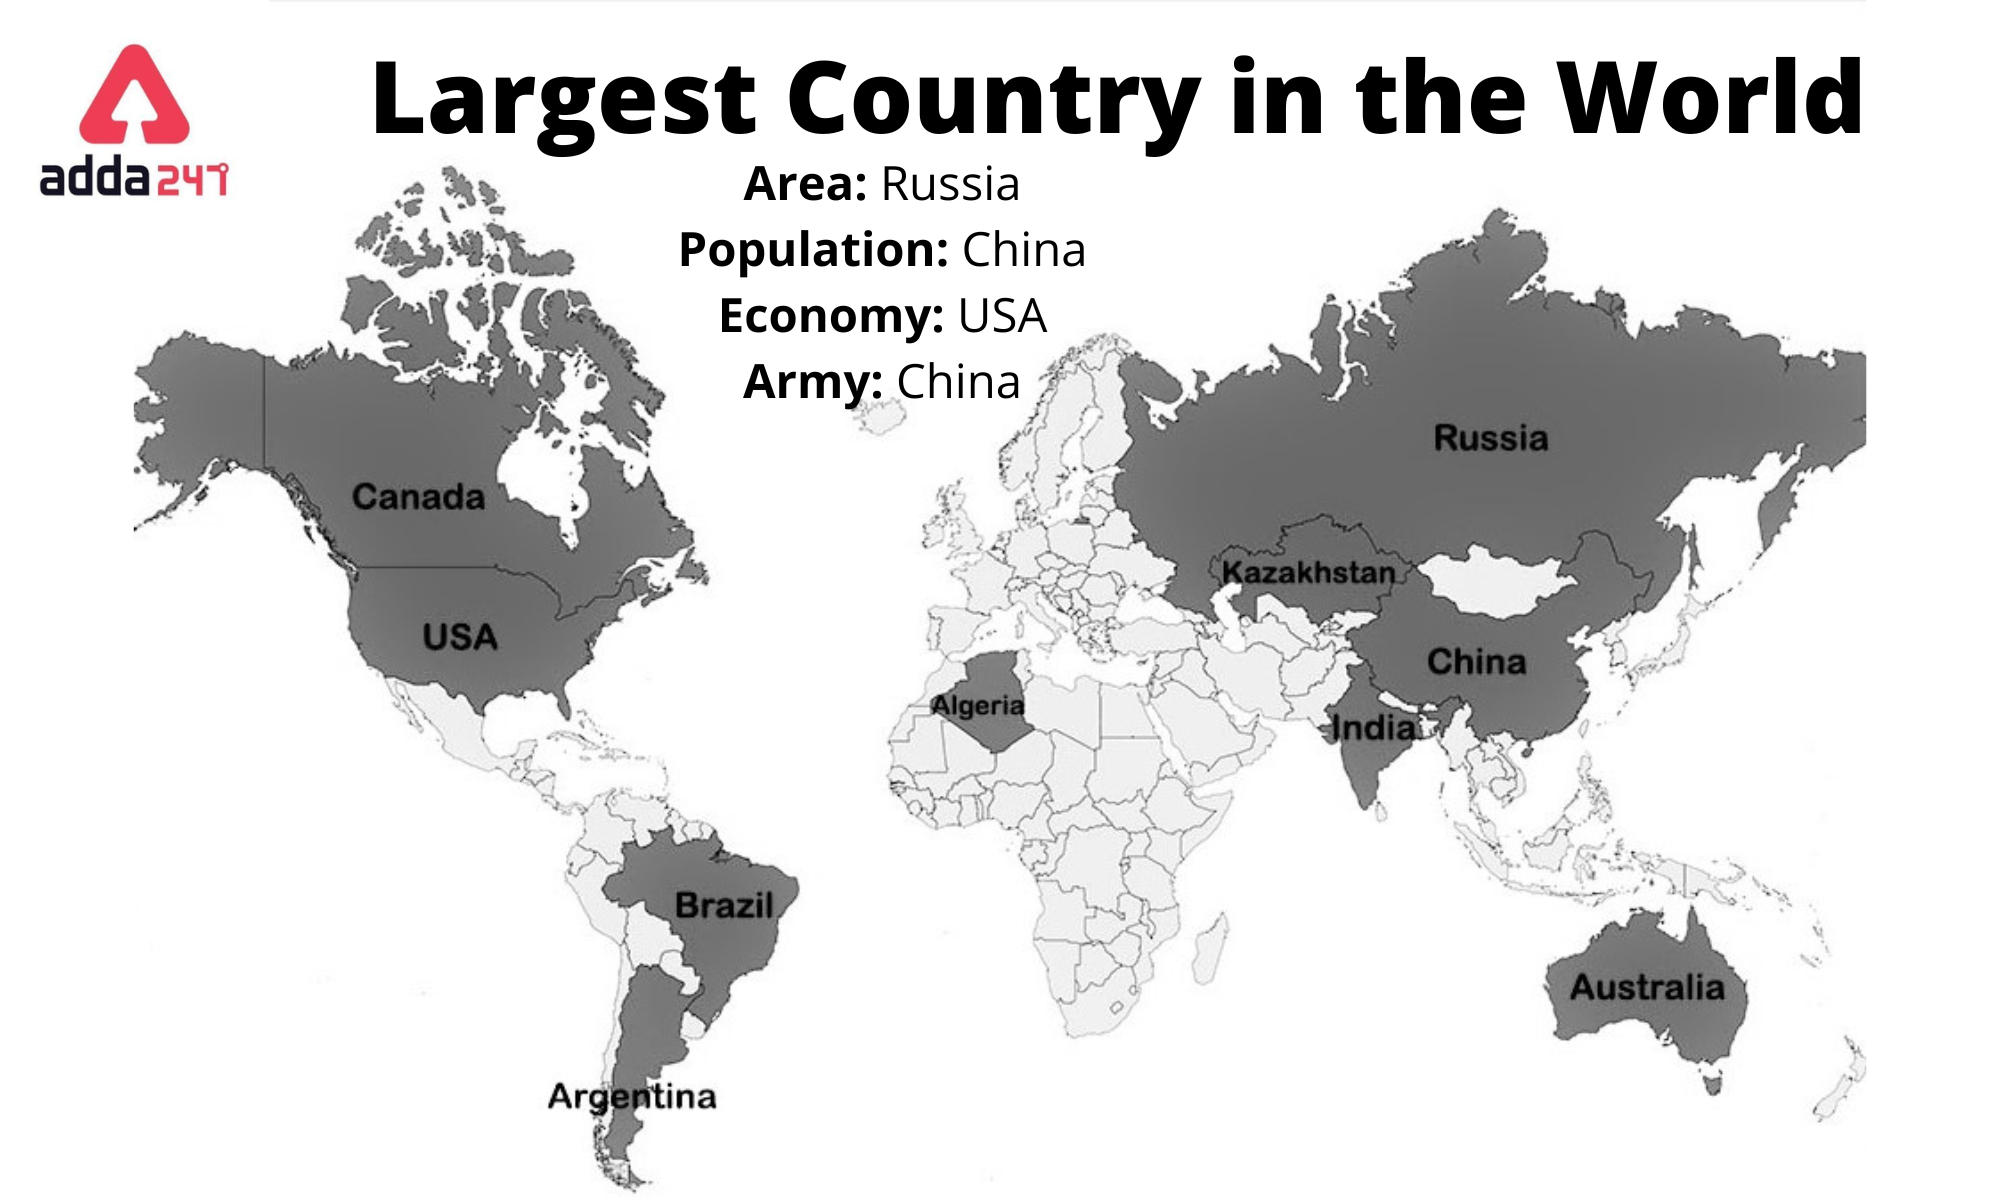 the-largest-country-in-the-world-by-area-population